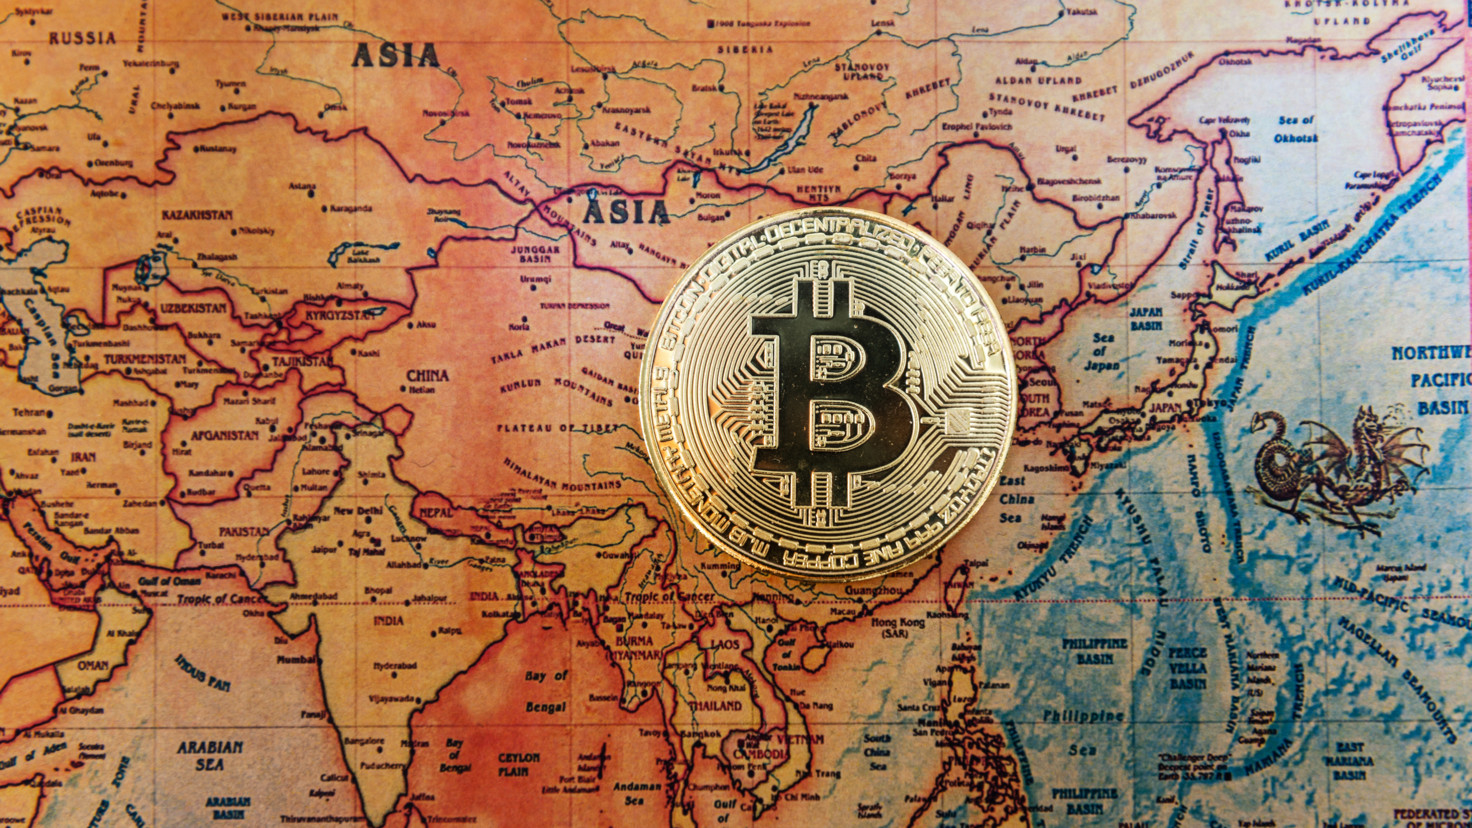 The new journey of Asian cryptocurrencies after China left the game